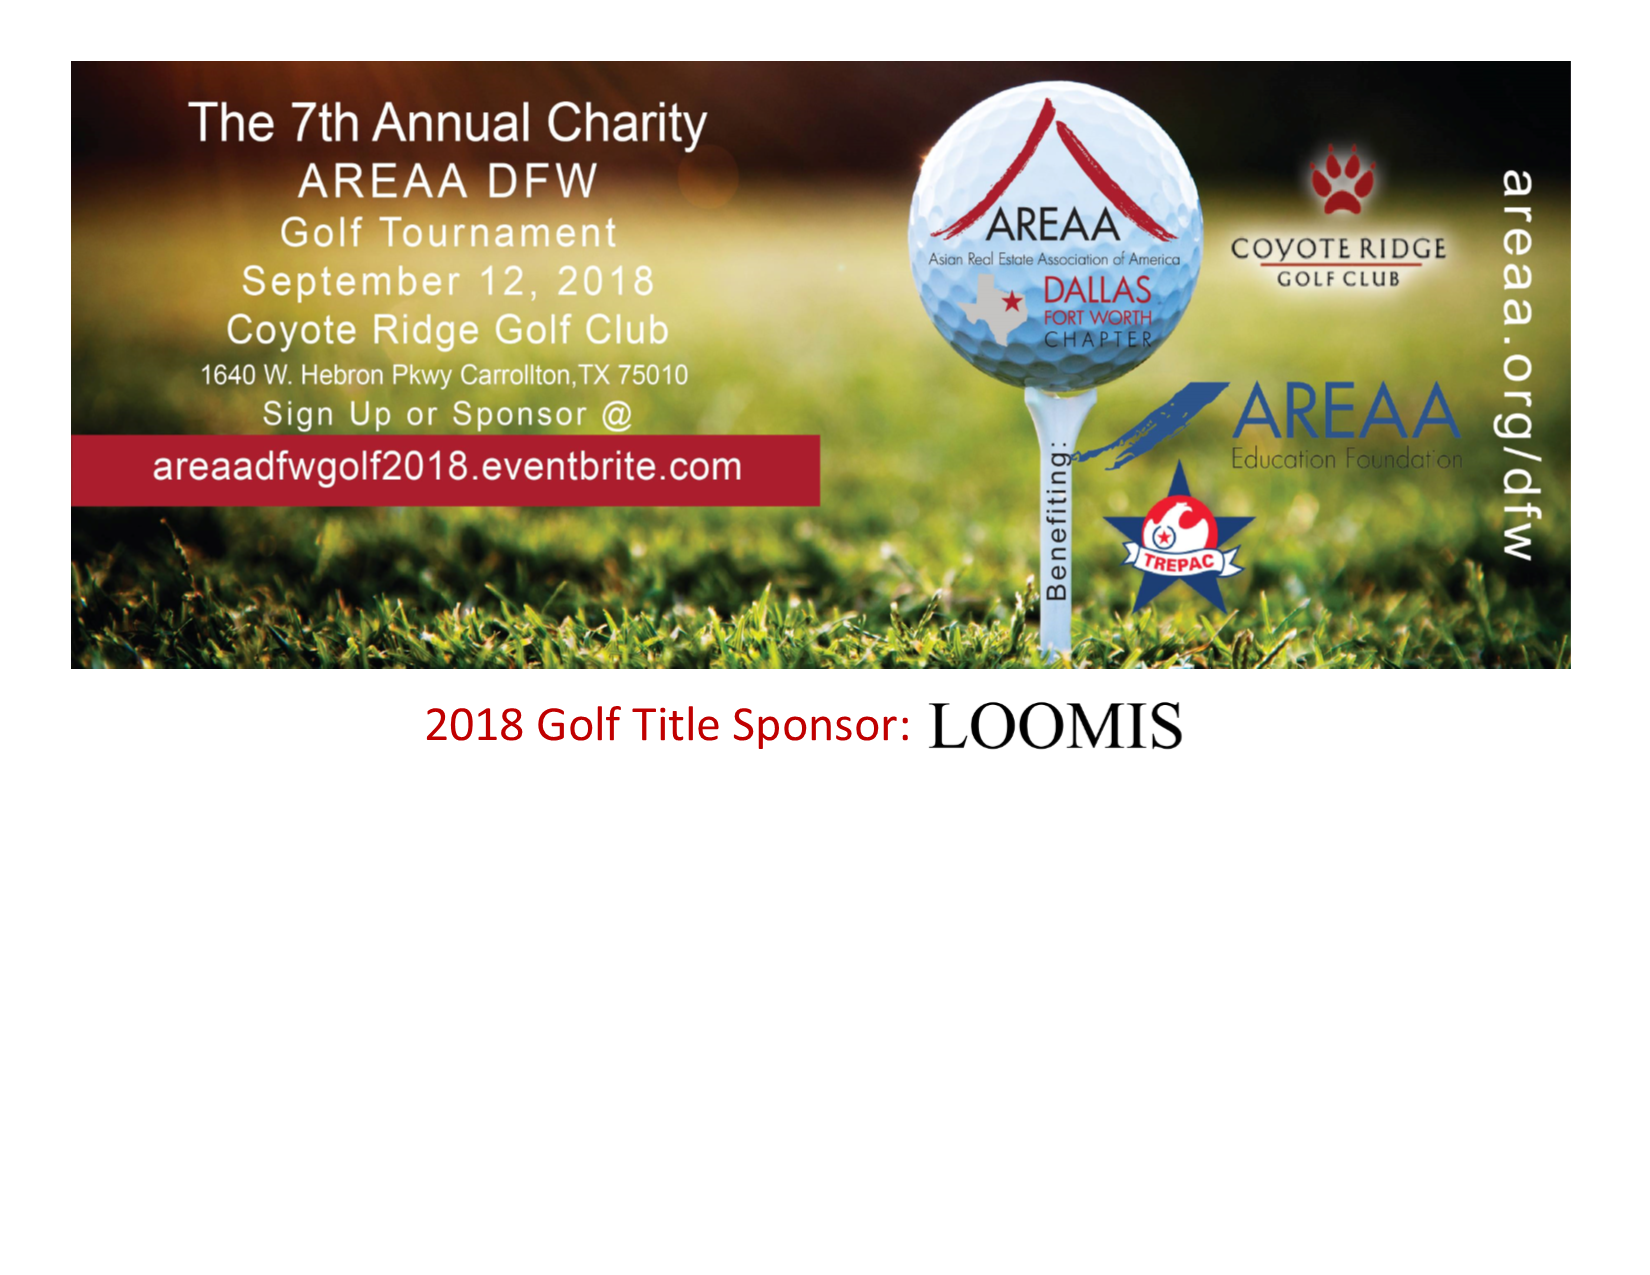 AREAA DFW 7TH ANNUAL GOLF TOURNAMENT 2018